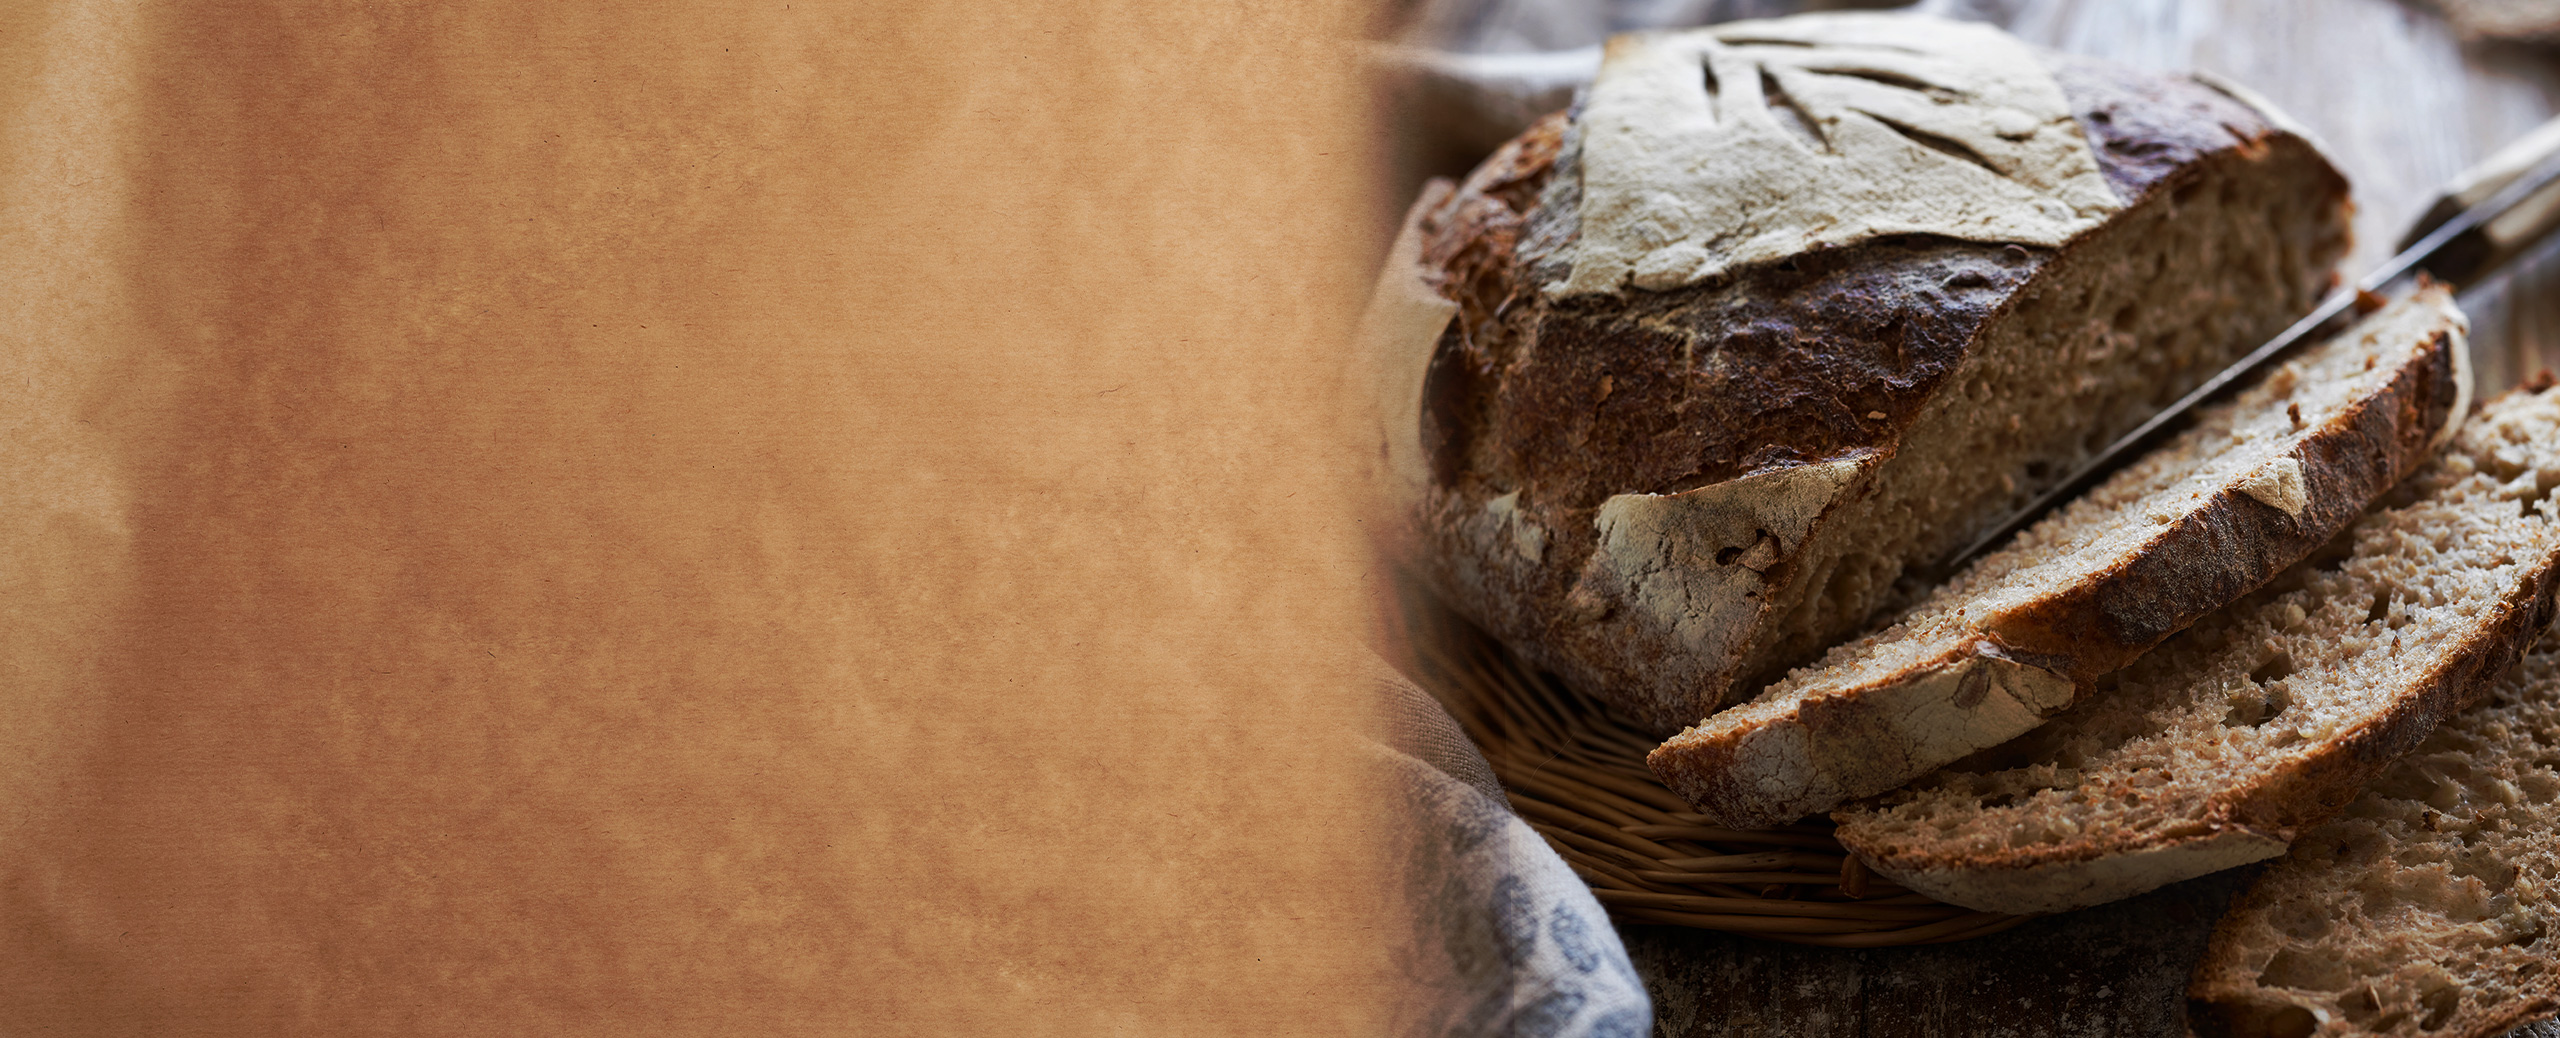 Wholesale Bakery Supplies UK - Bread Mixes & Concentrates